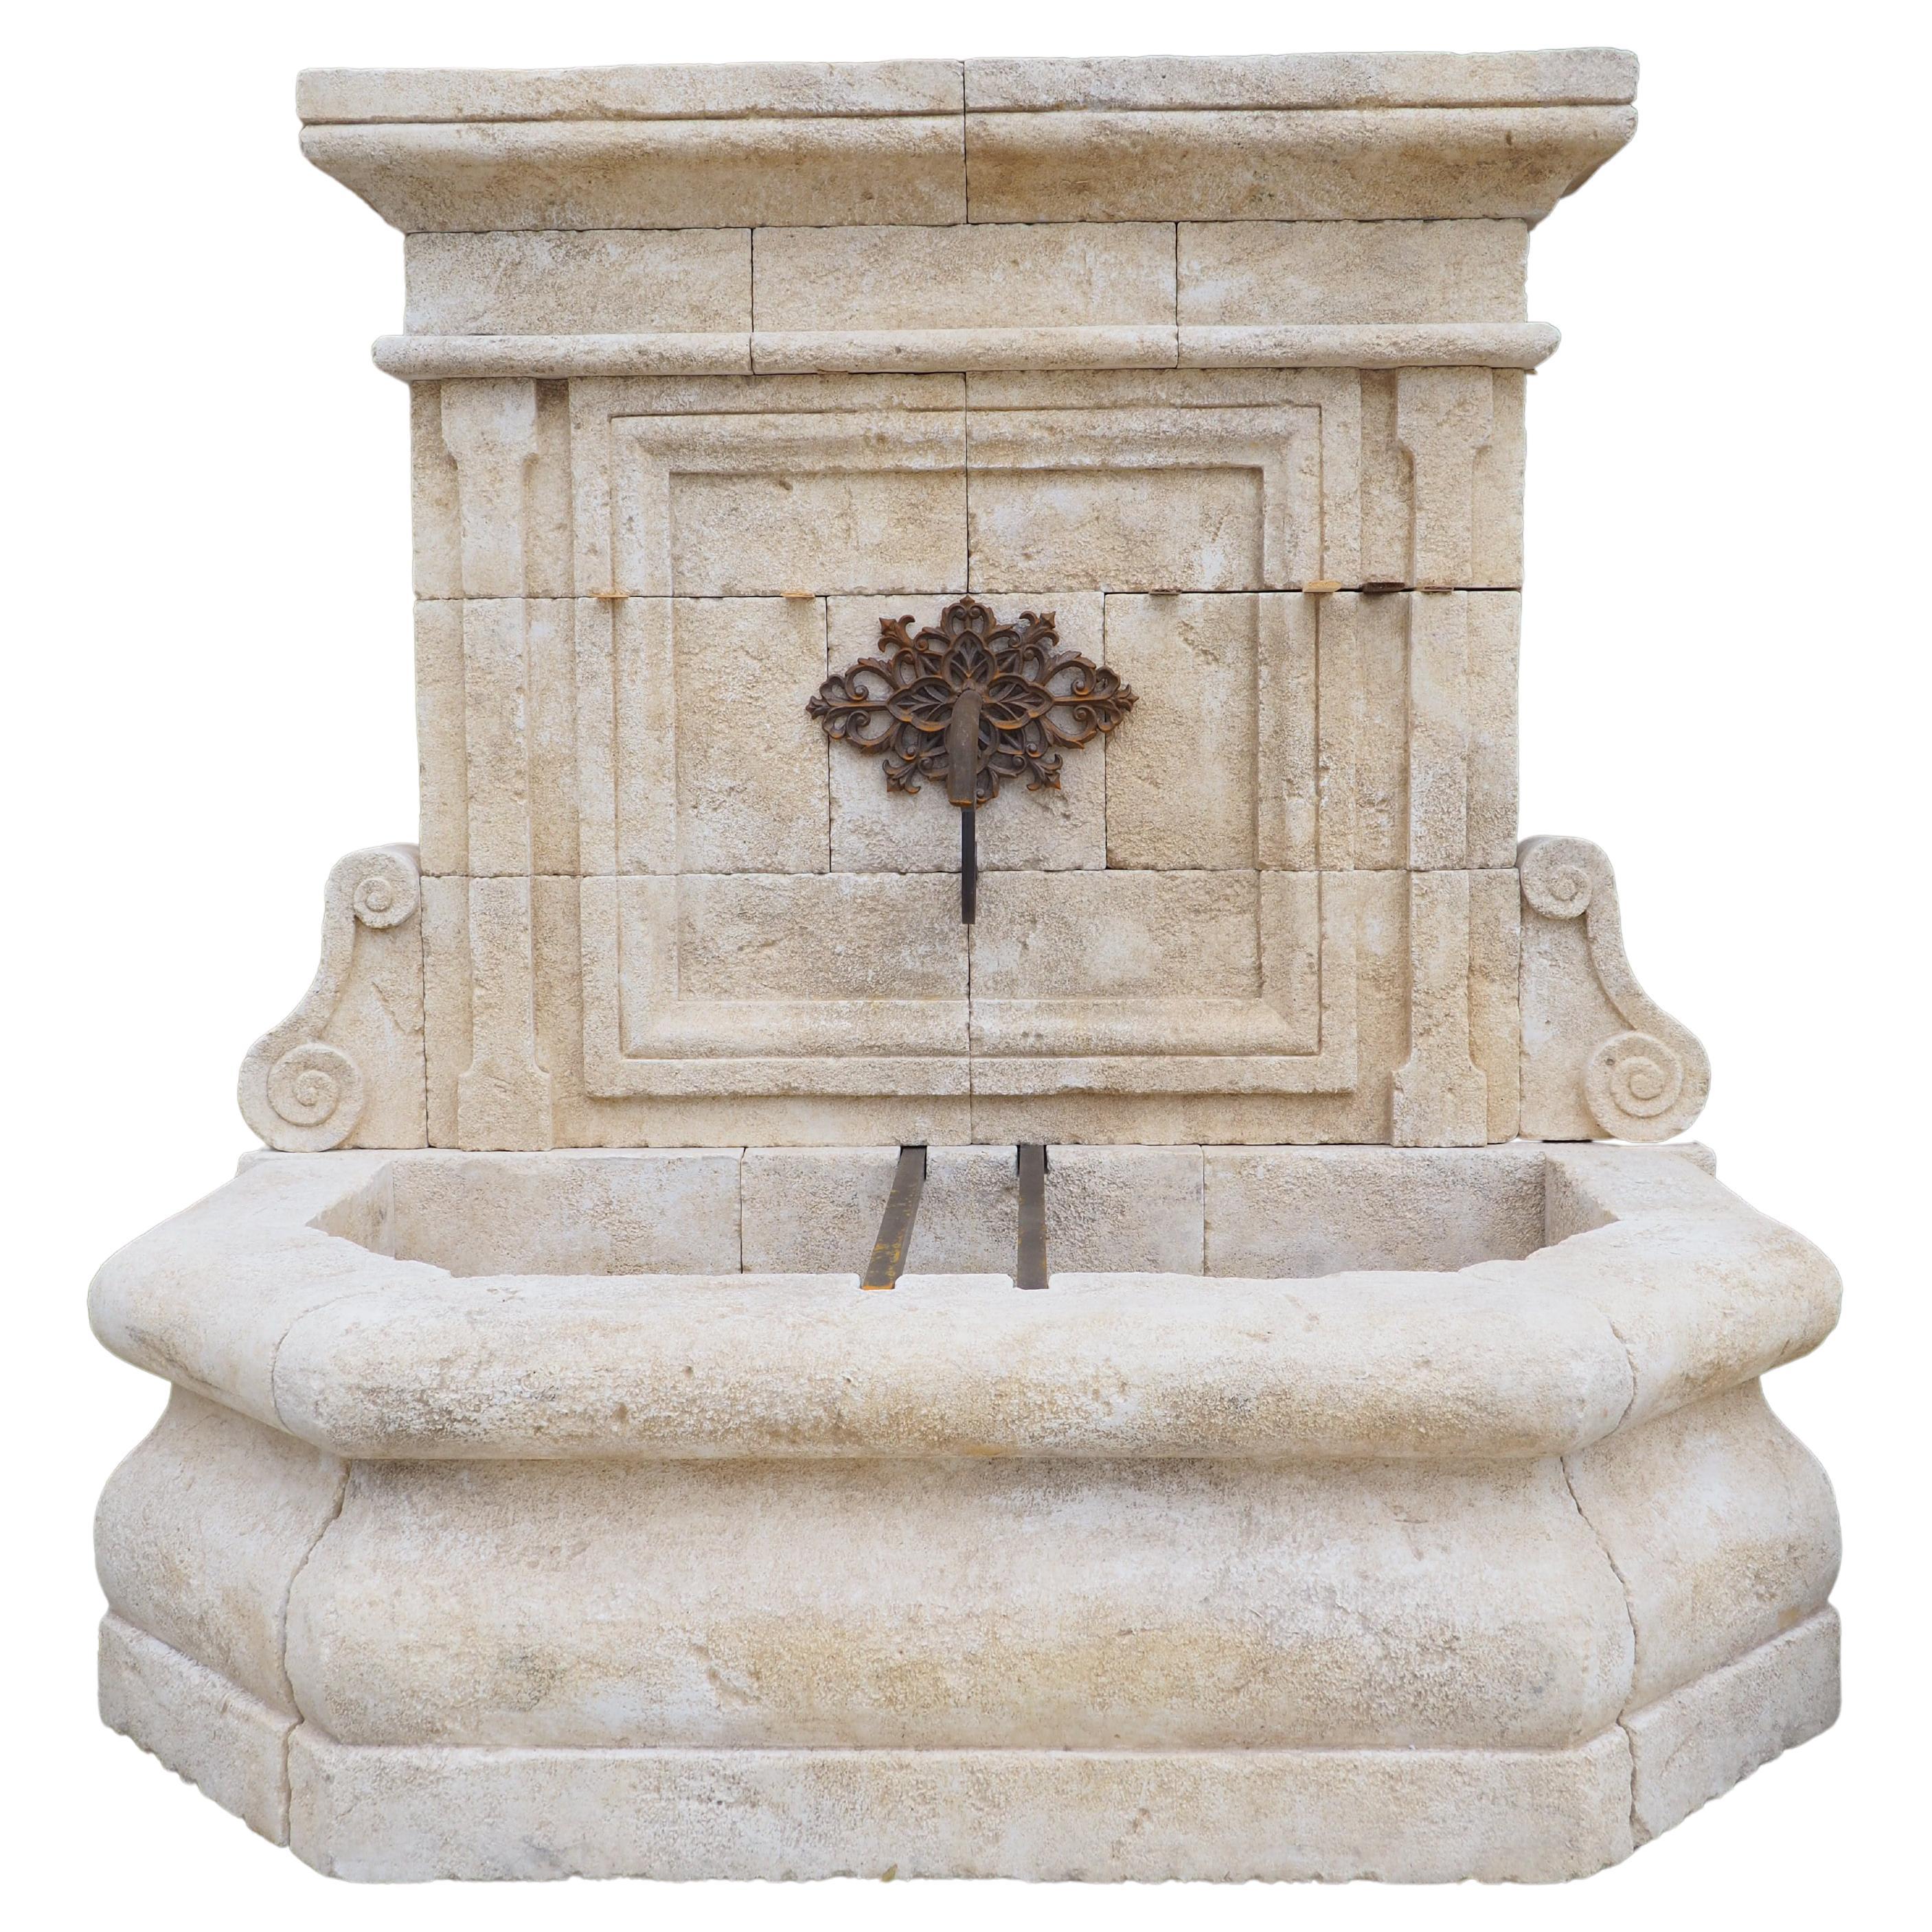 Limestone Wall Fountain from the Vaucluse, Provence France